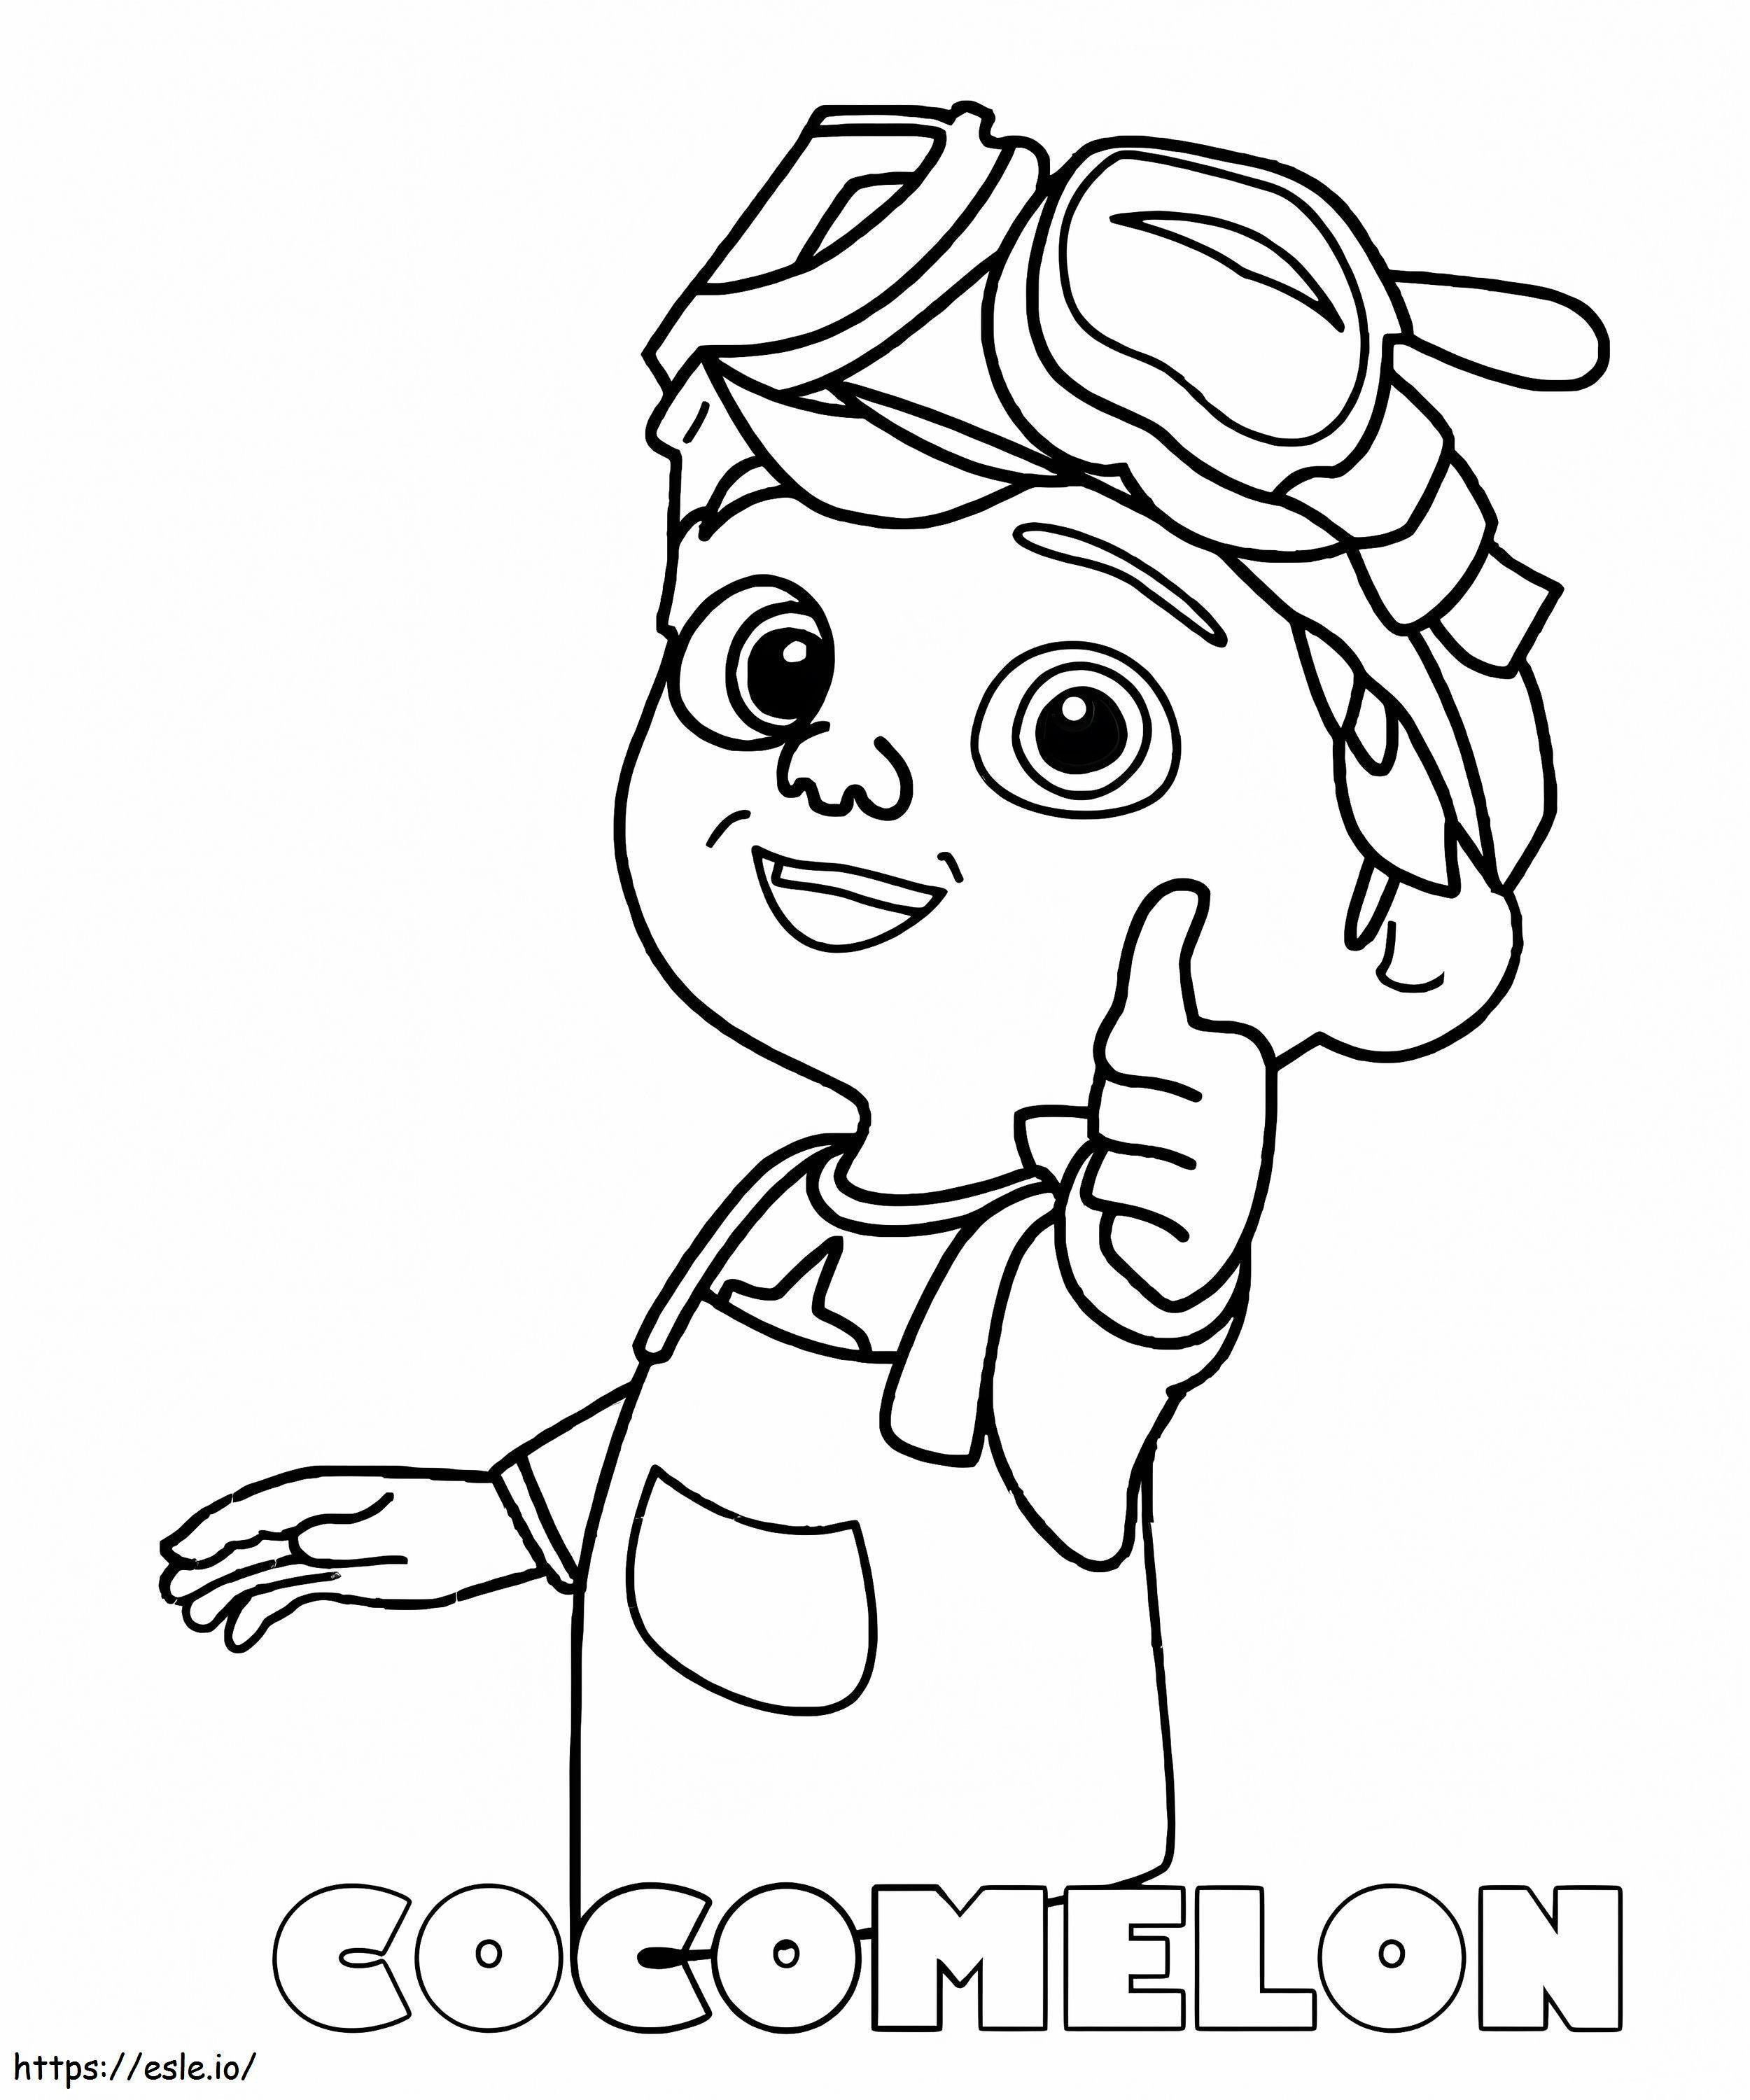 Tom Tom Cocomelon coloring page